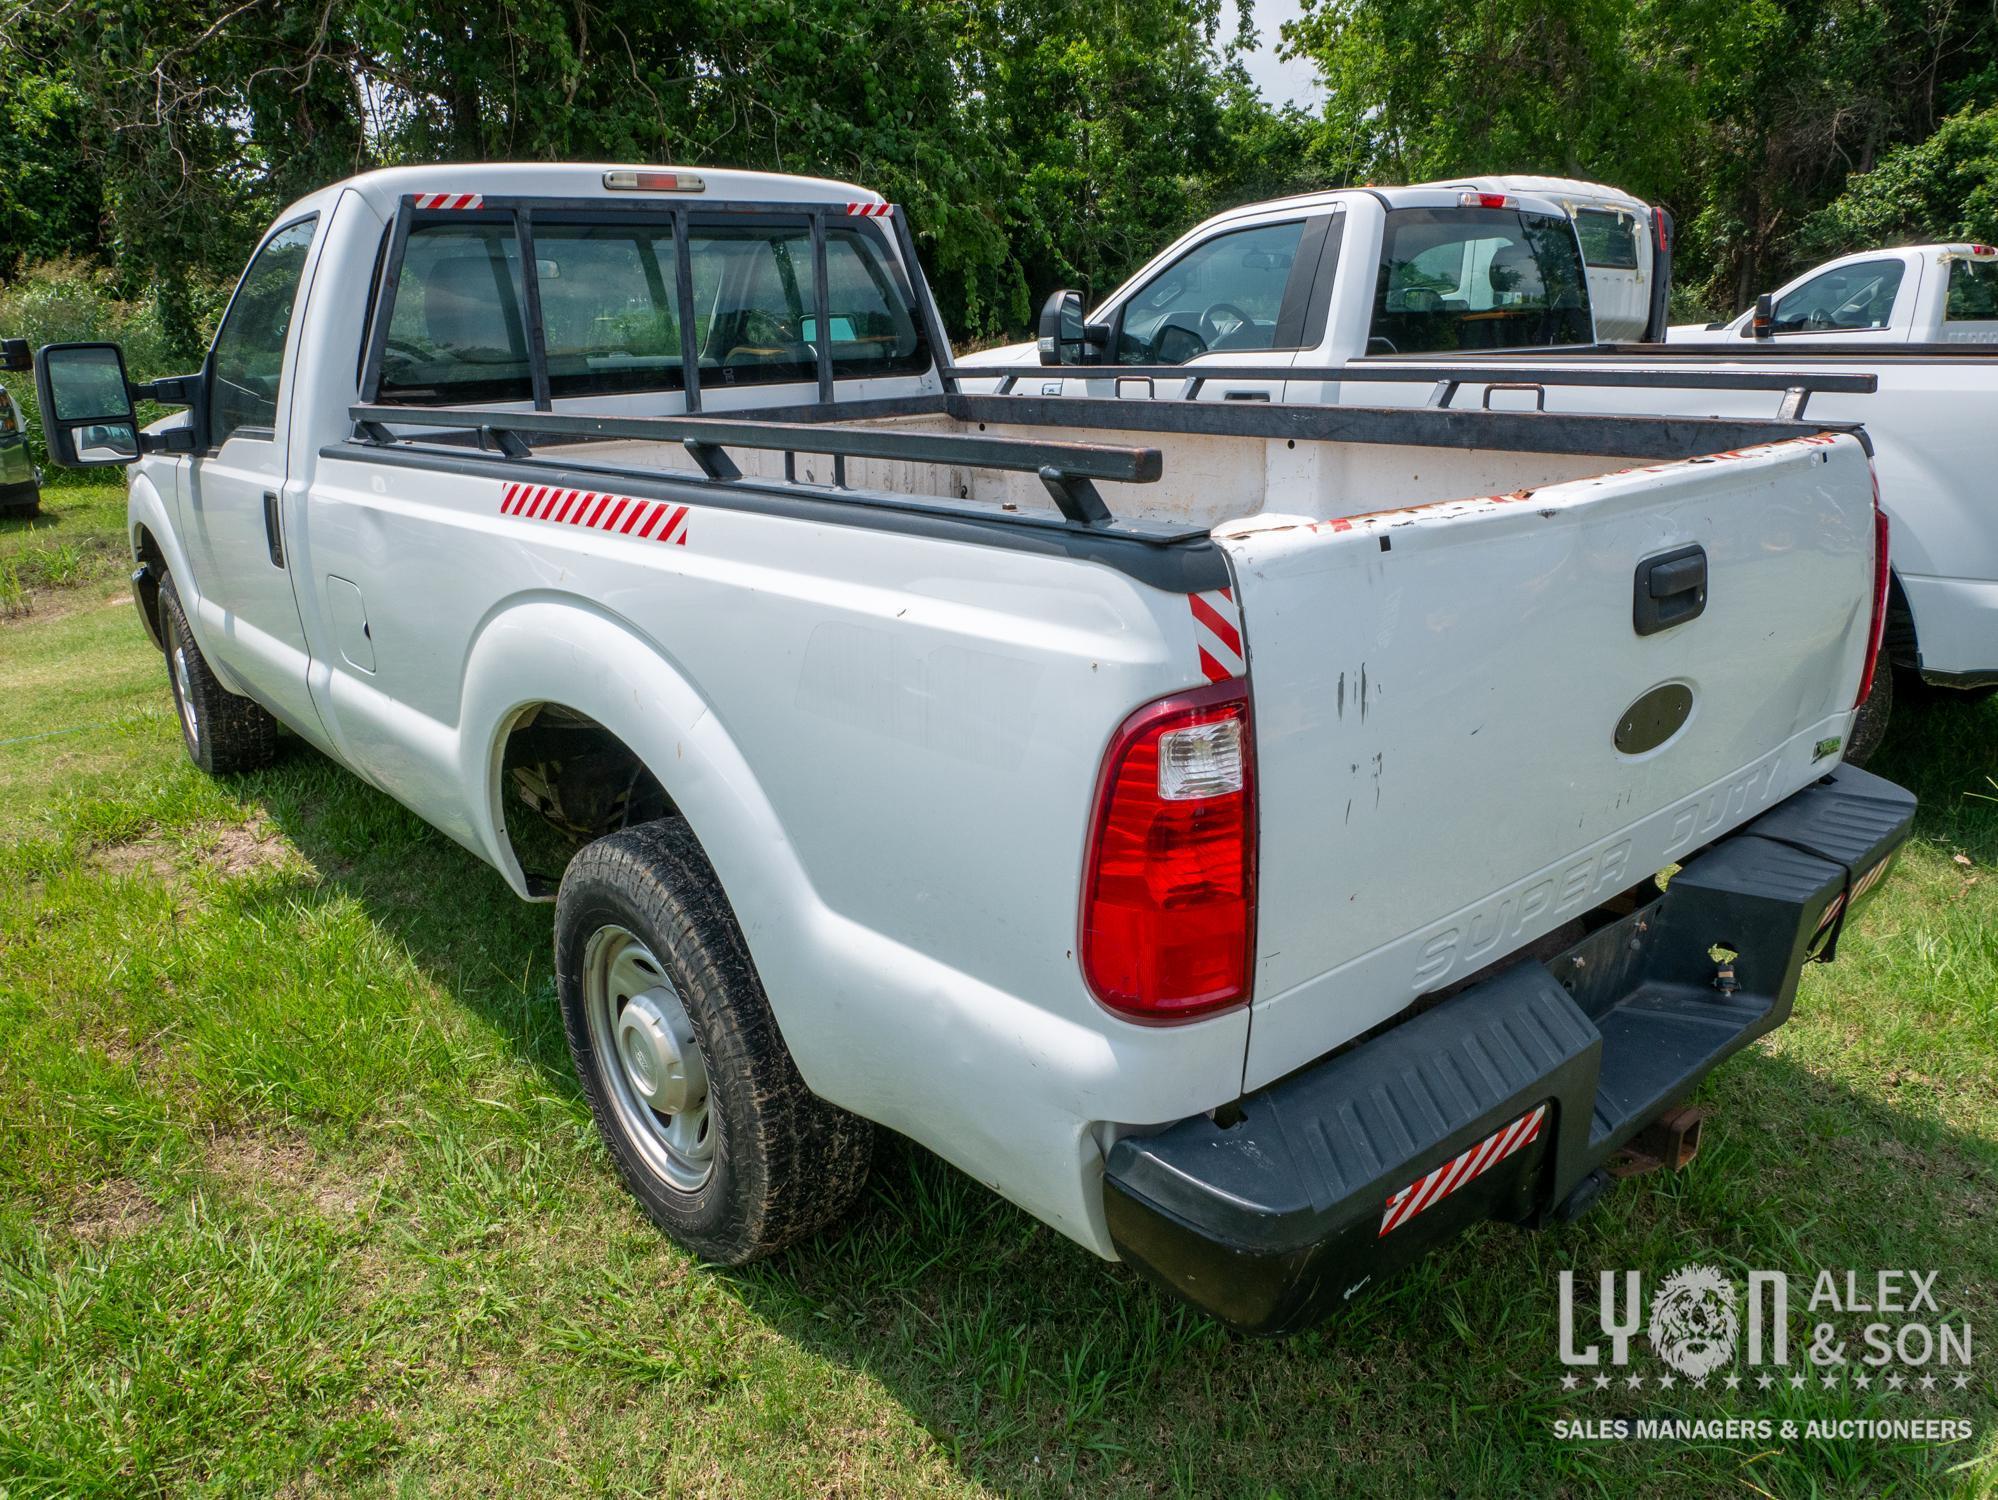 2015 FORD F350 PICKUP TRUCK VN:C38425 powered by gas engine, equipped with automatic transmission,